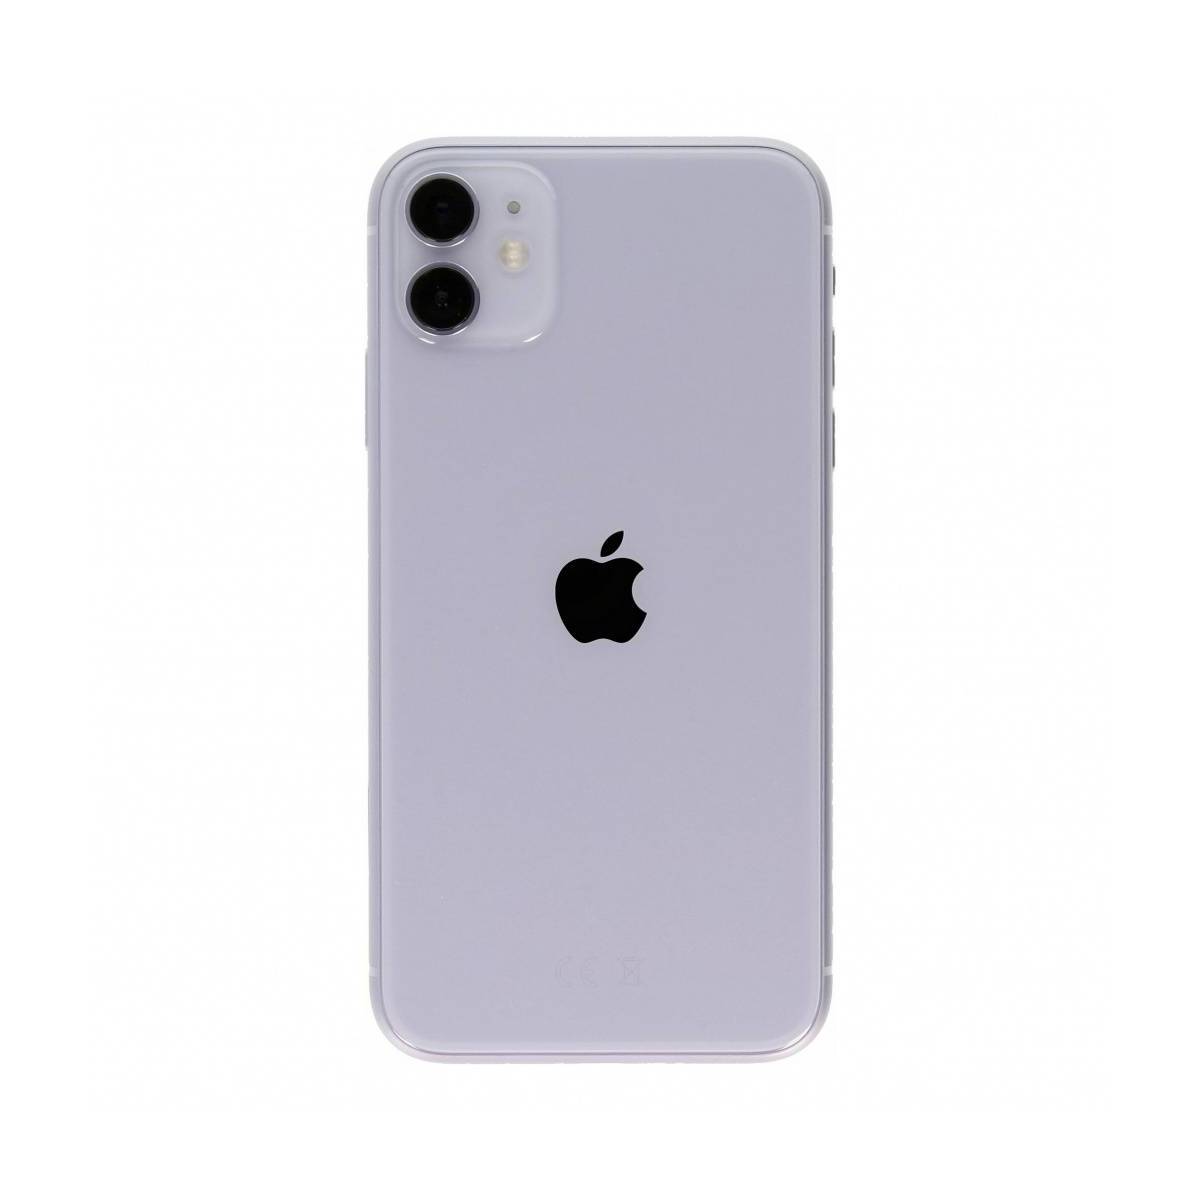 Chassis iPhone 11 Mauve